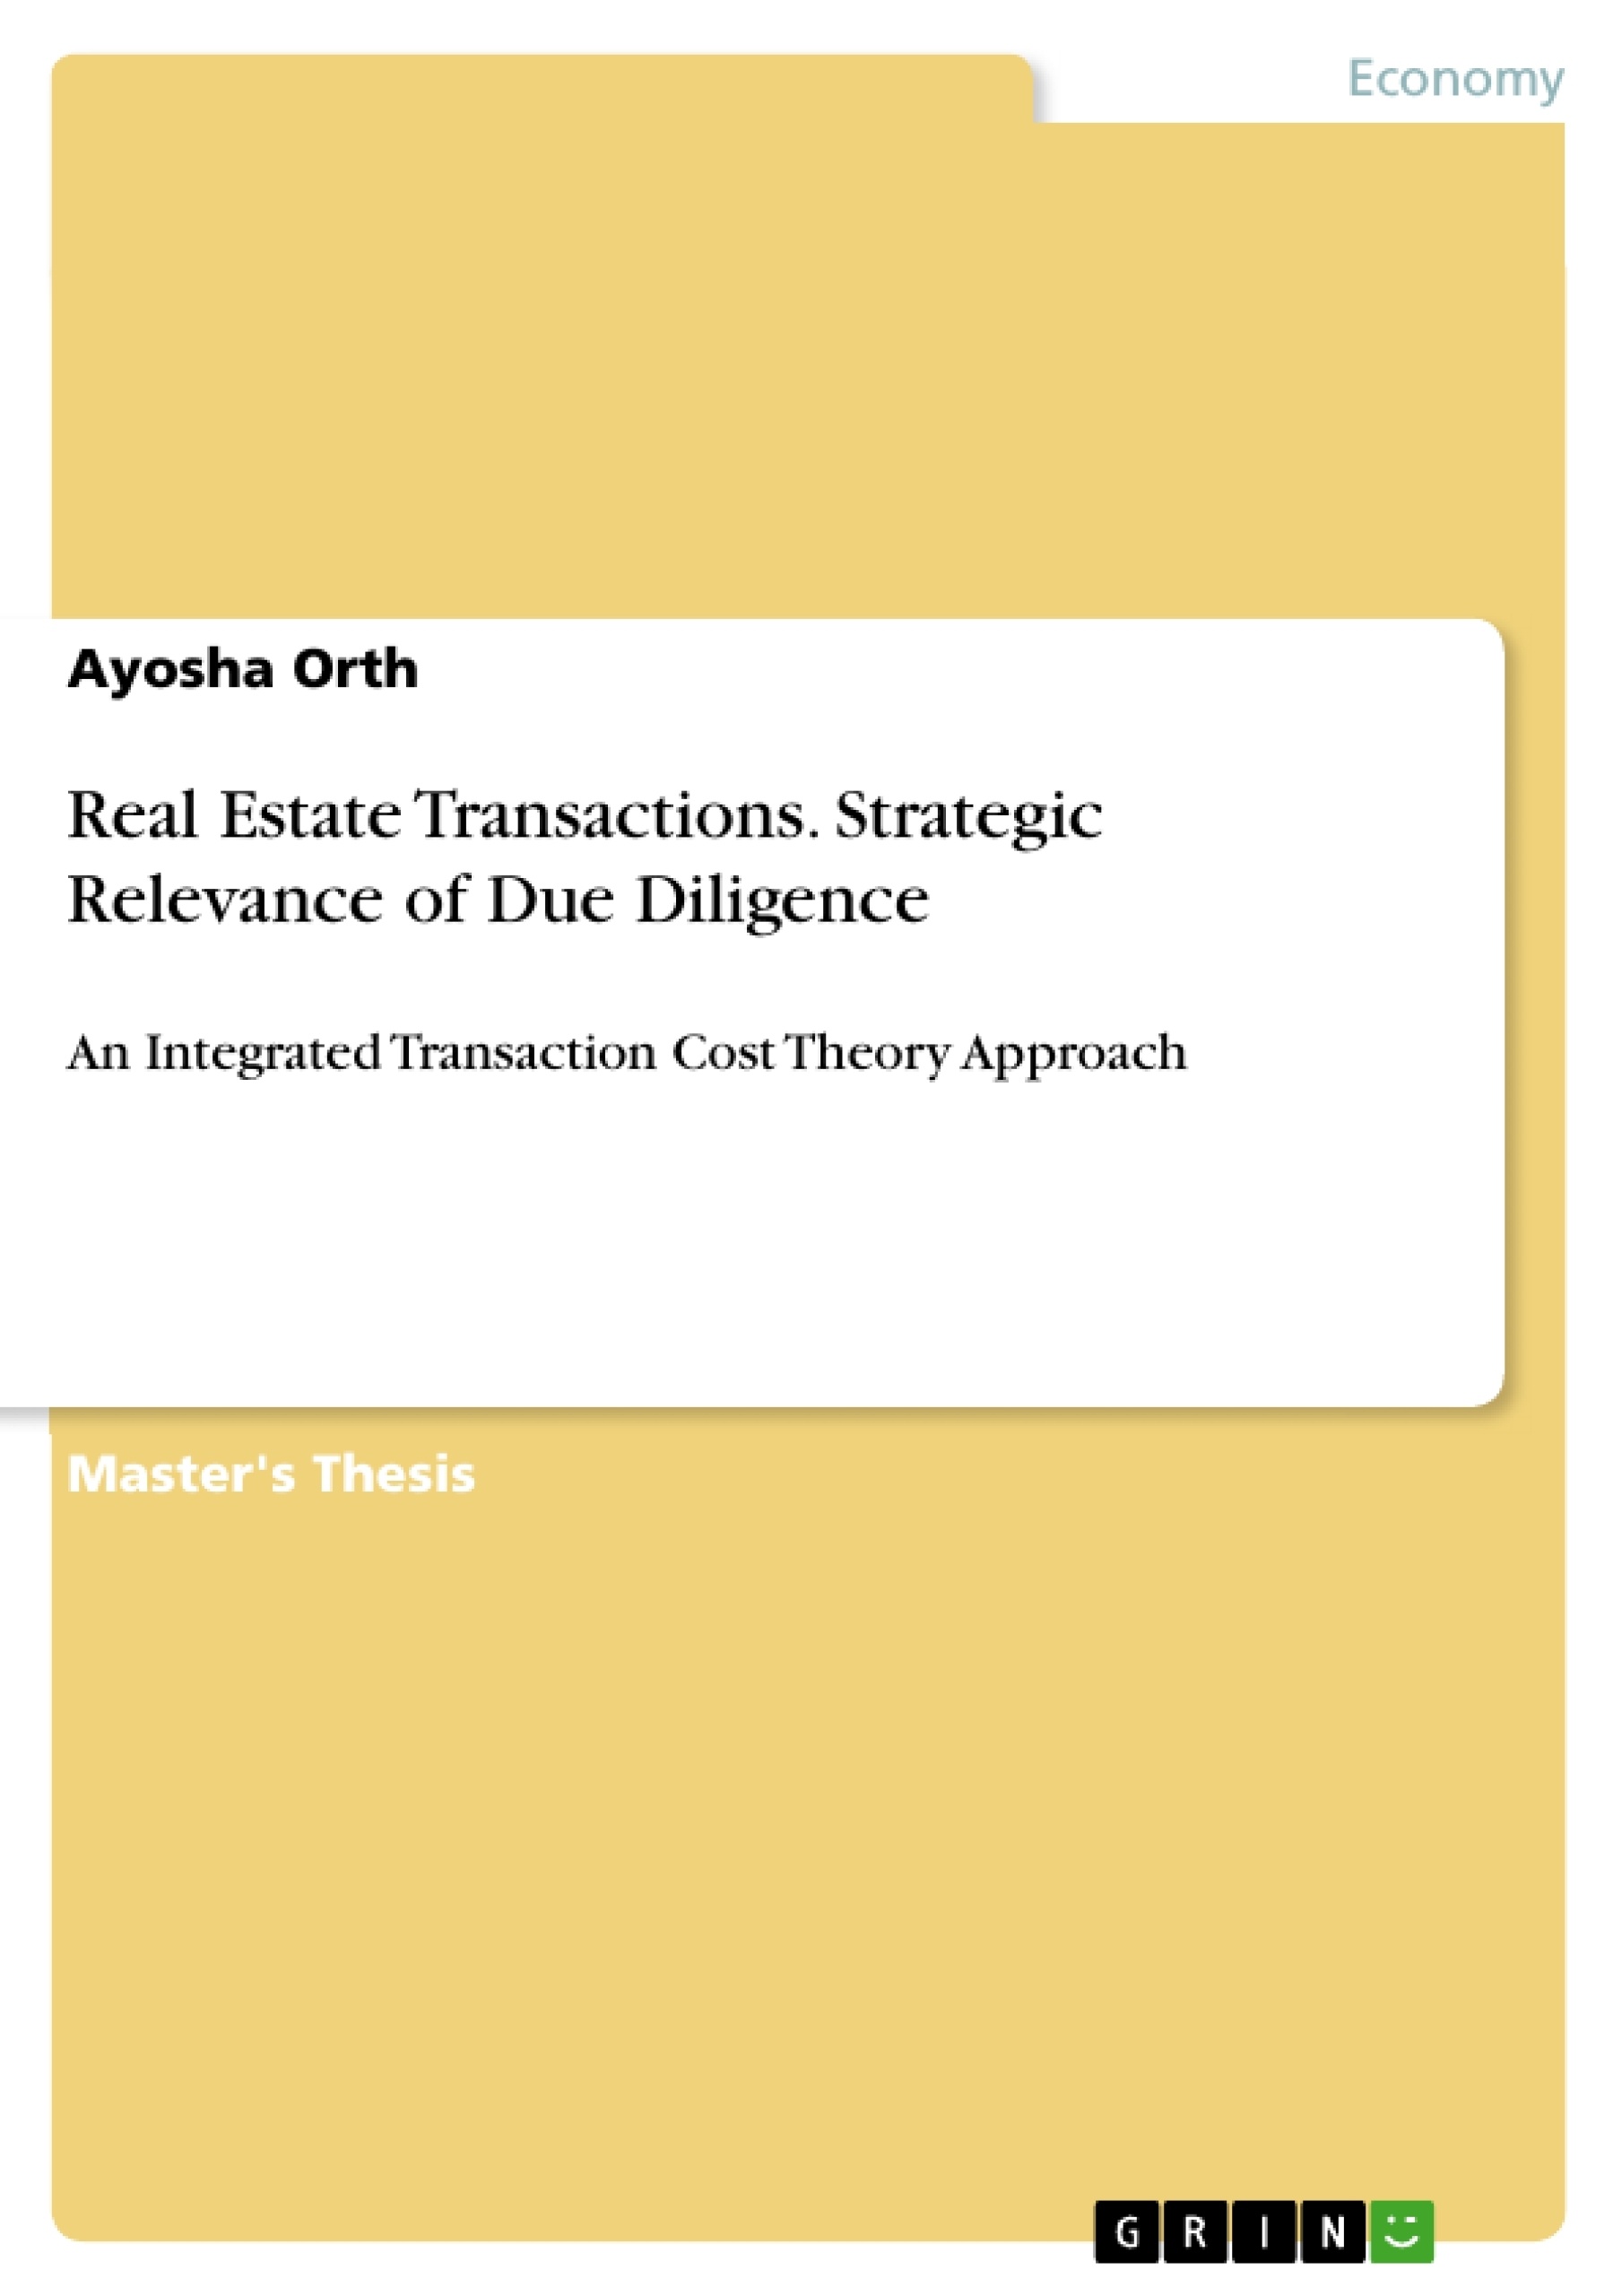 Title: Real Estate Transactions. Strategic Relevance of Due Diligence